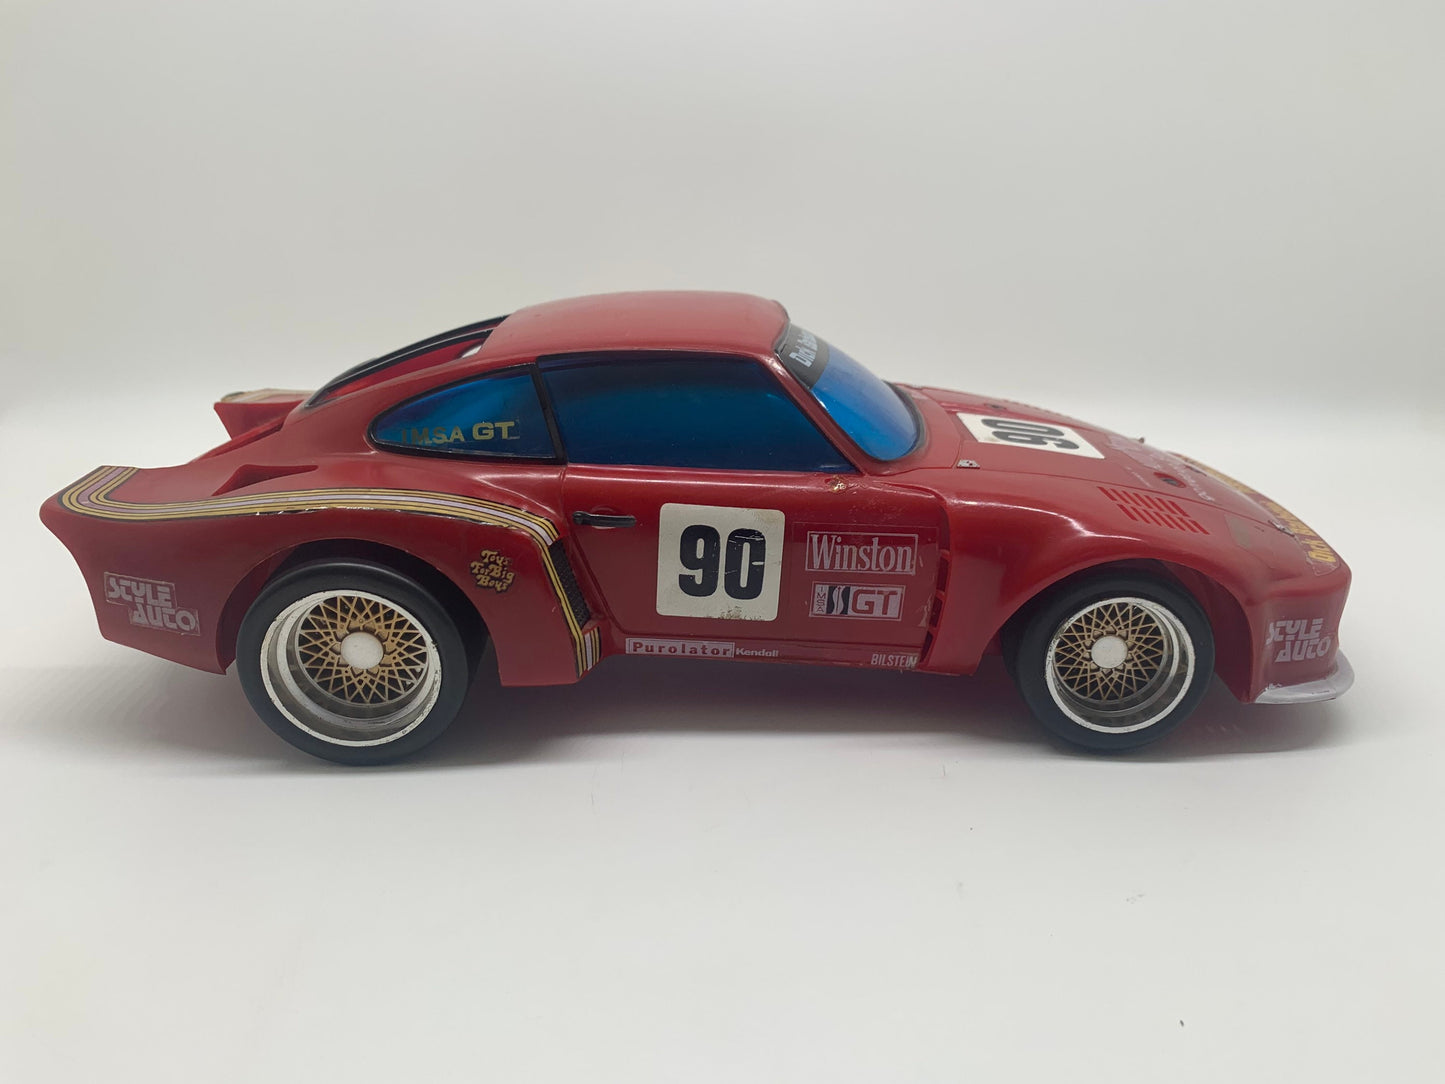 Daviess County Dick Barbour Racing Porsche 935 Turbo GT Red Toys For Big Boys Collectible Scale Model Car Kentucky Whiskey Bourbon Decanter